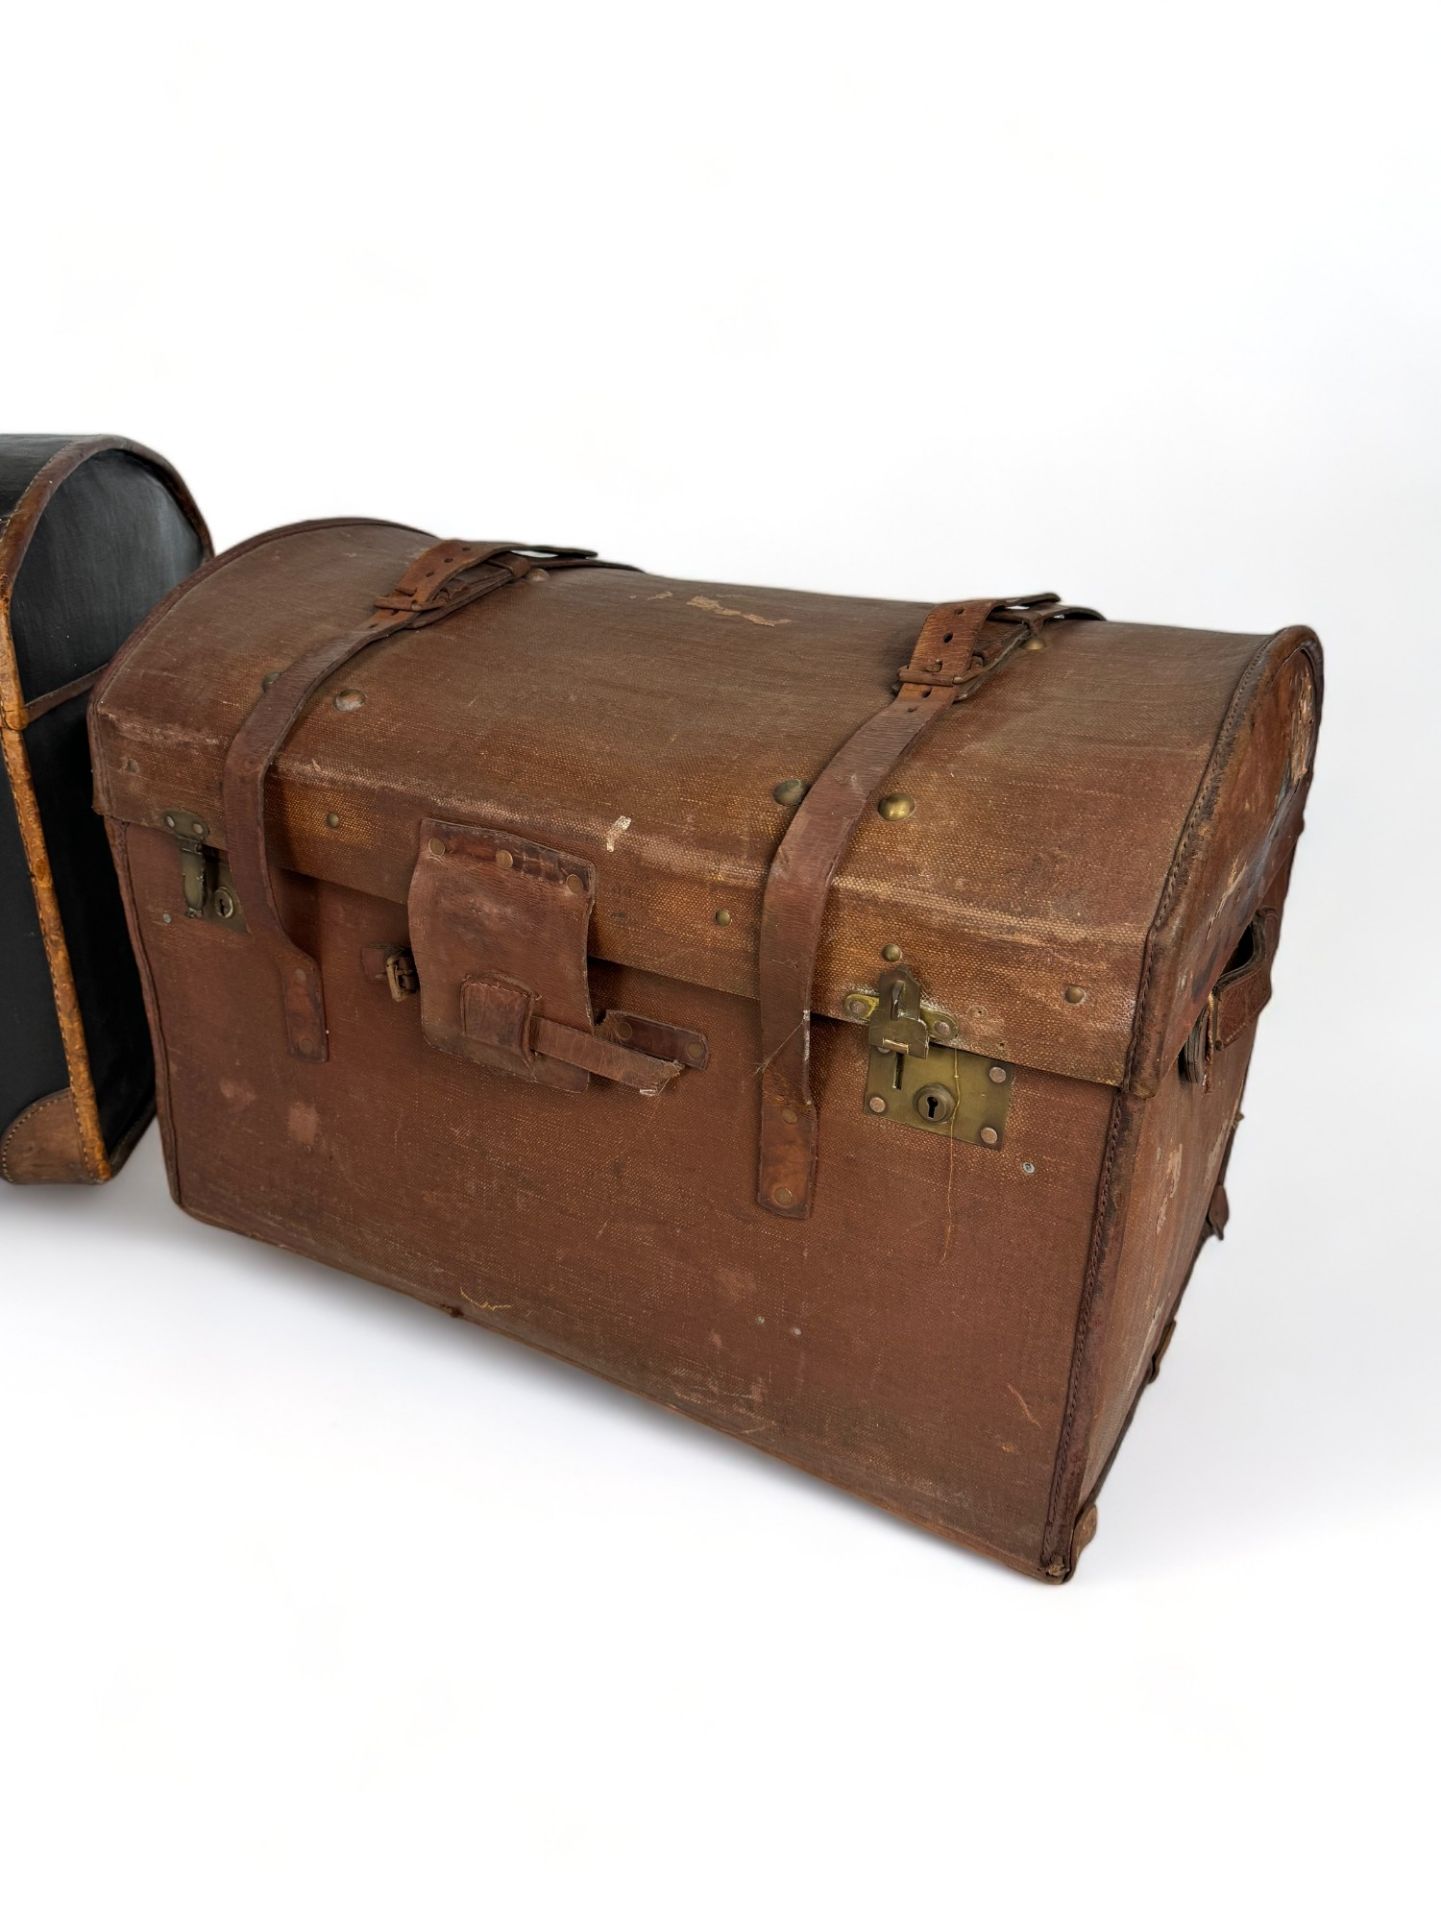 Two 19th century domed top travelling trunks - Image 3 of 8